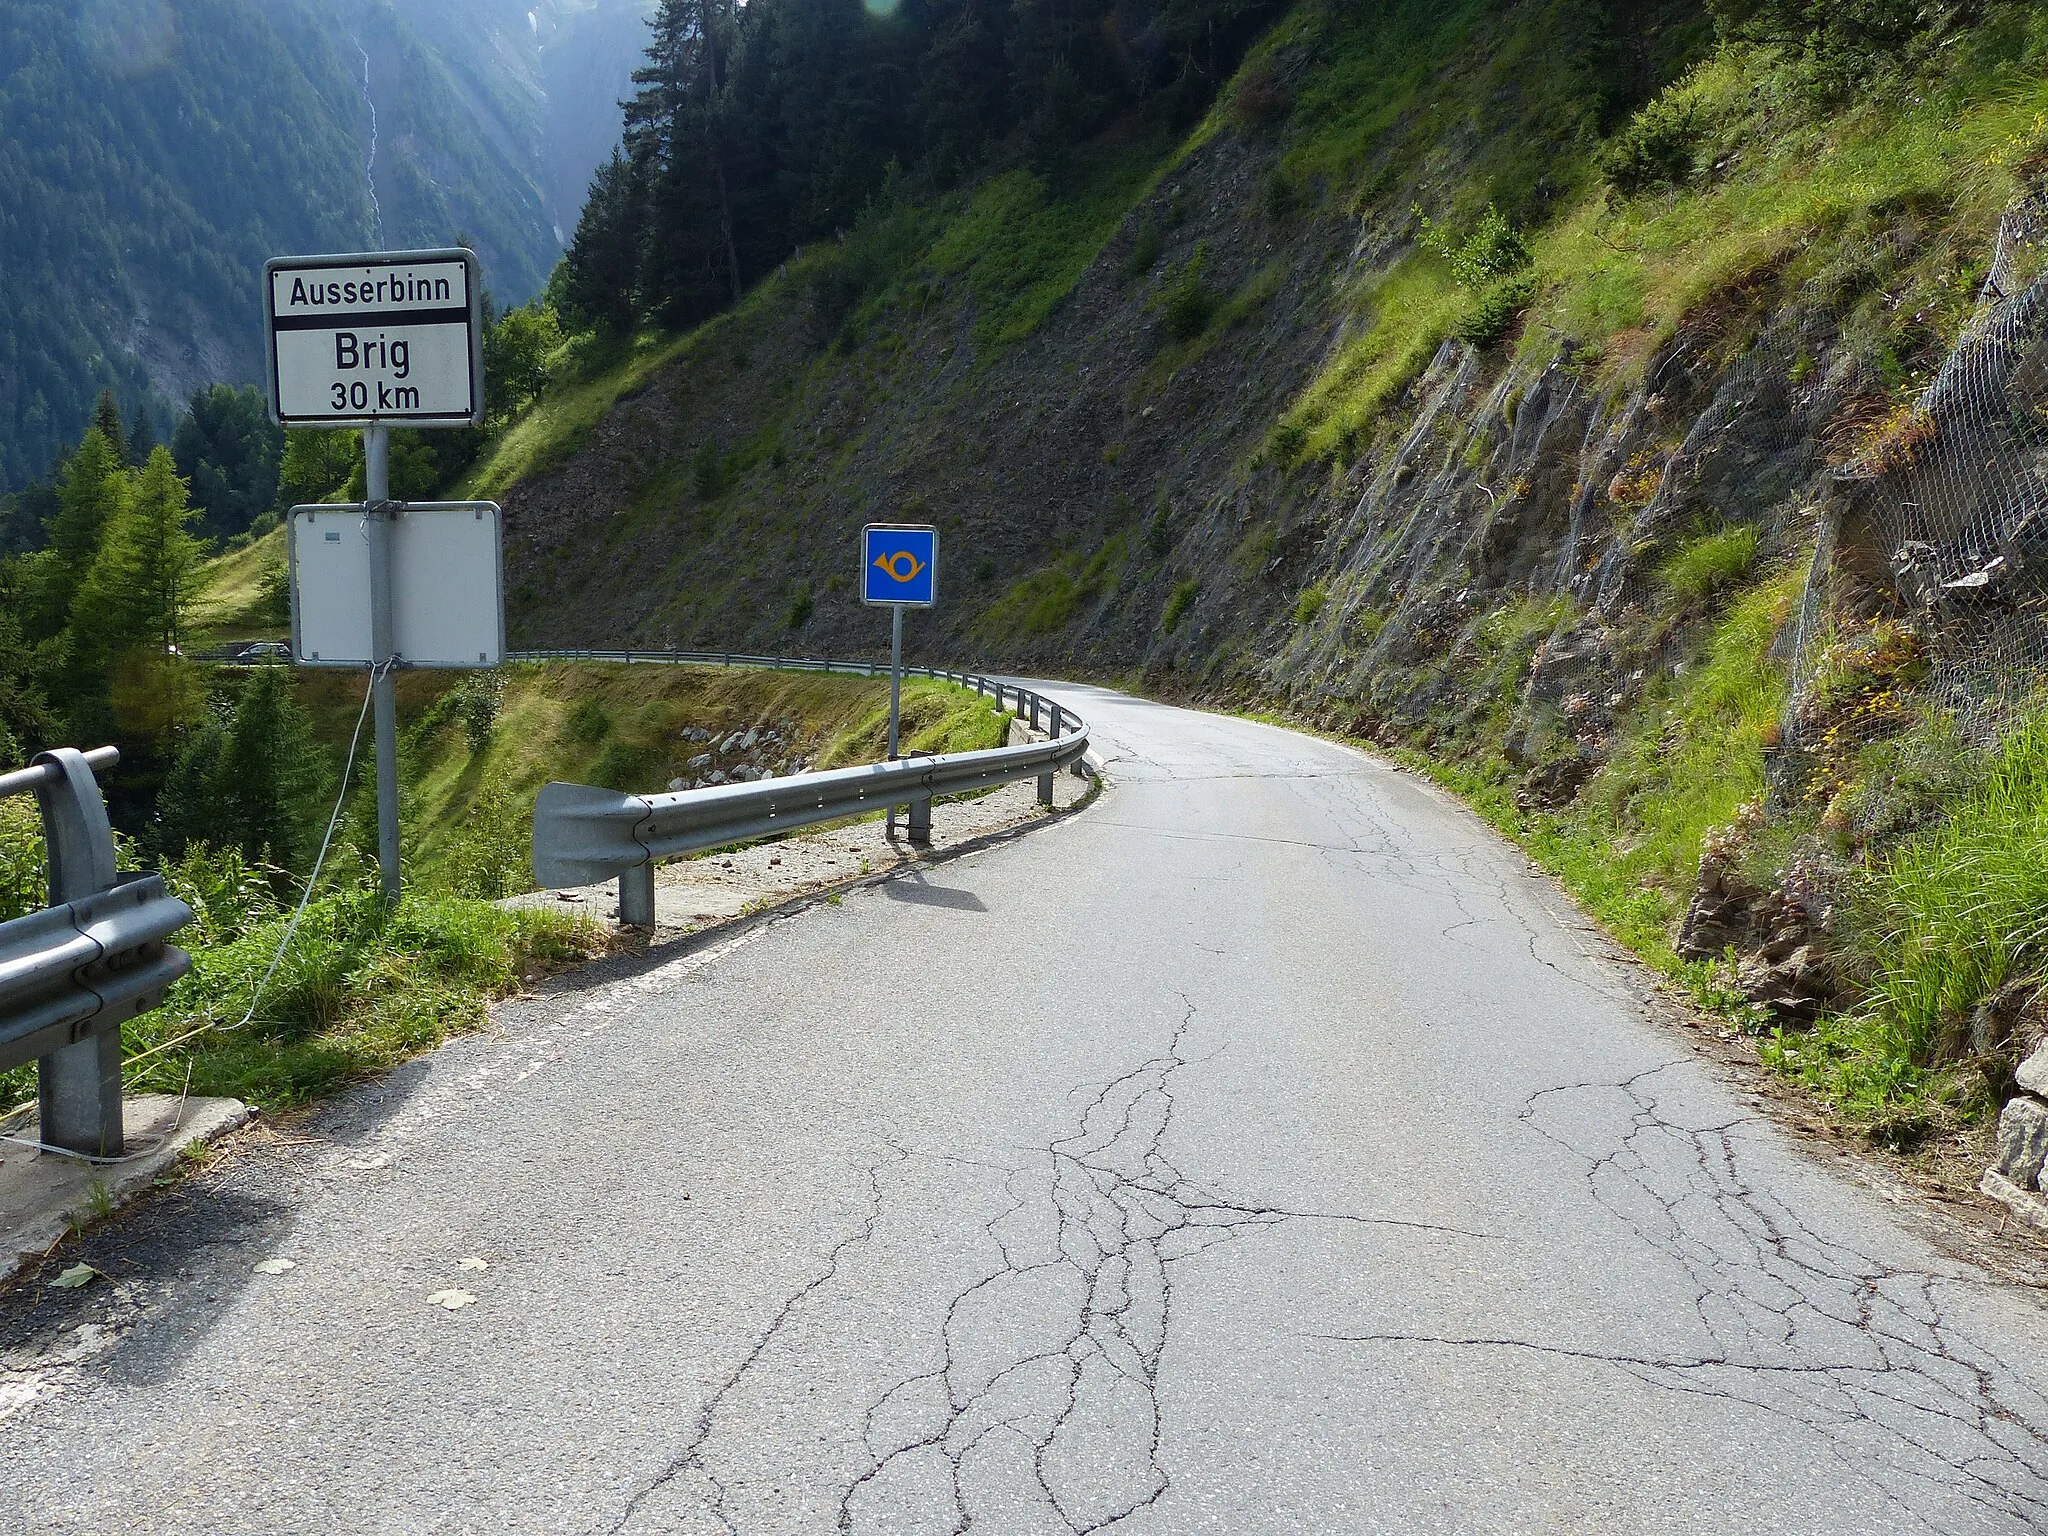 Photo showing: Road leaving Binn, Switzerland, with road signs